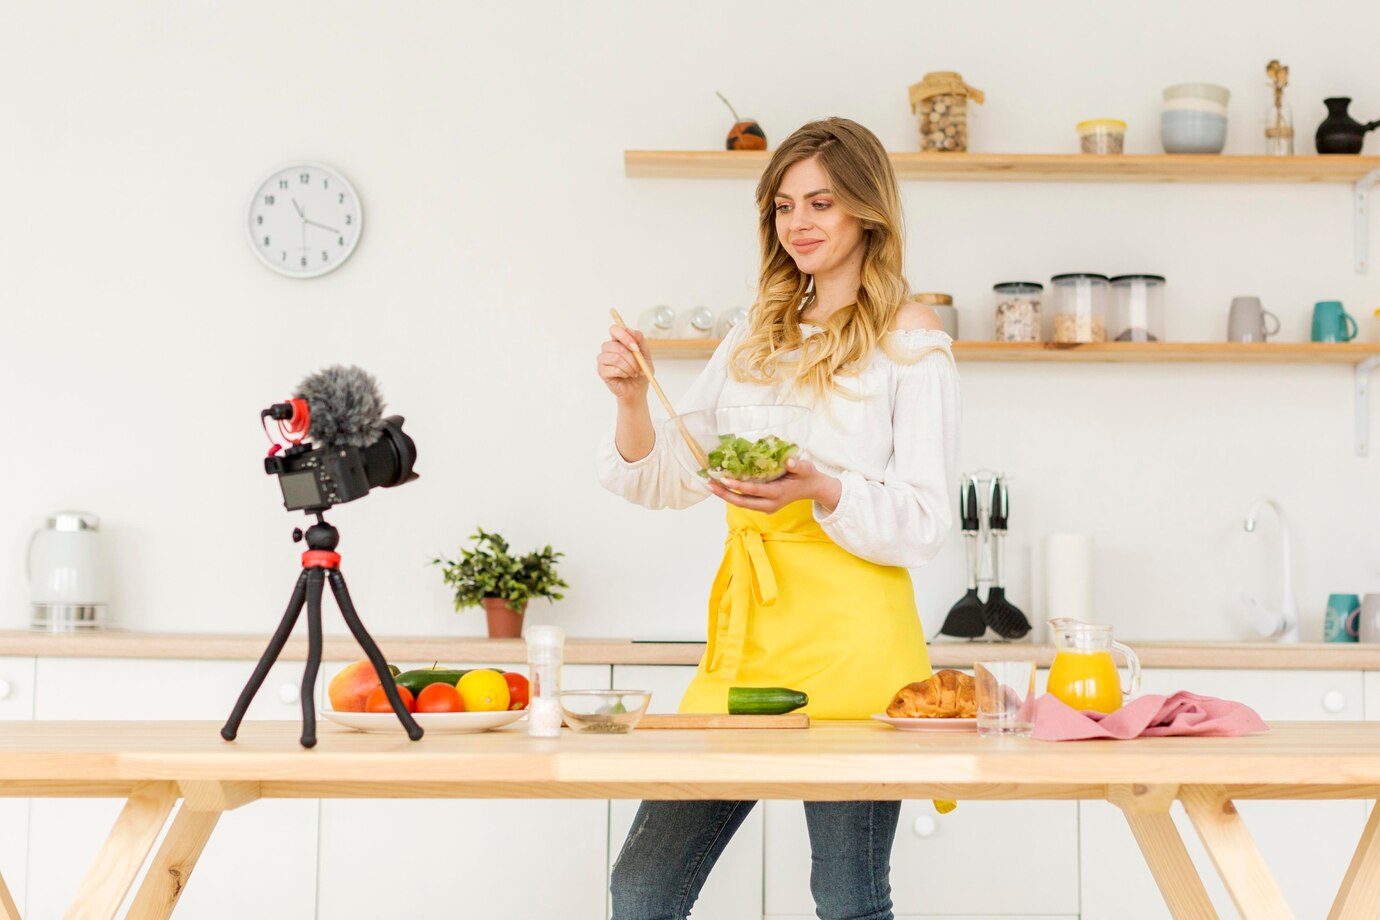 Instagram IGTV Cooking Shows: Sharing Recipes and Culinary Tips